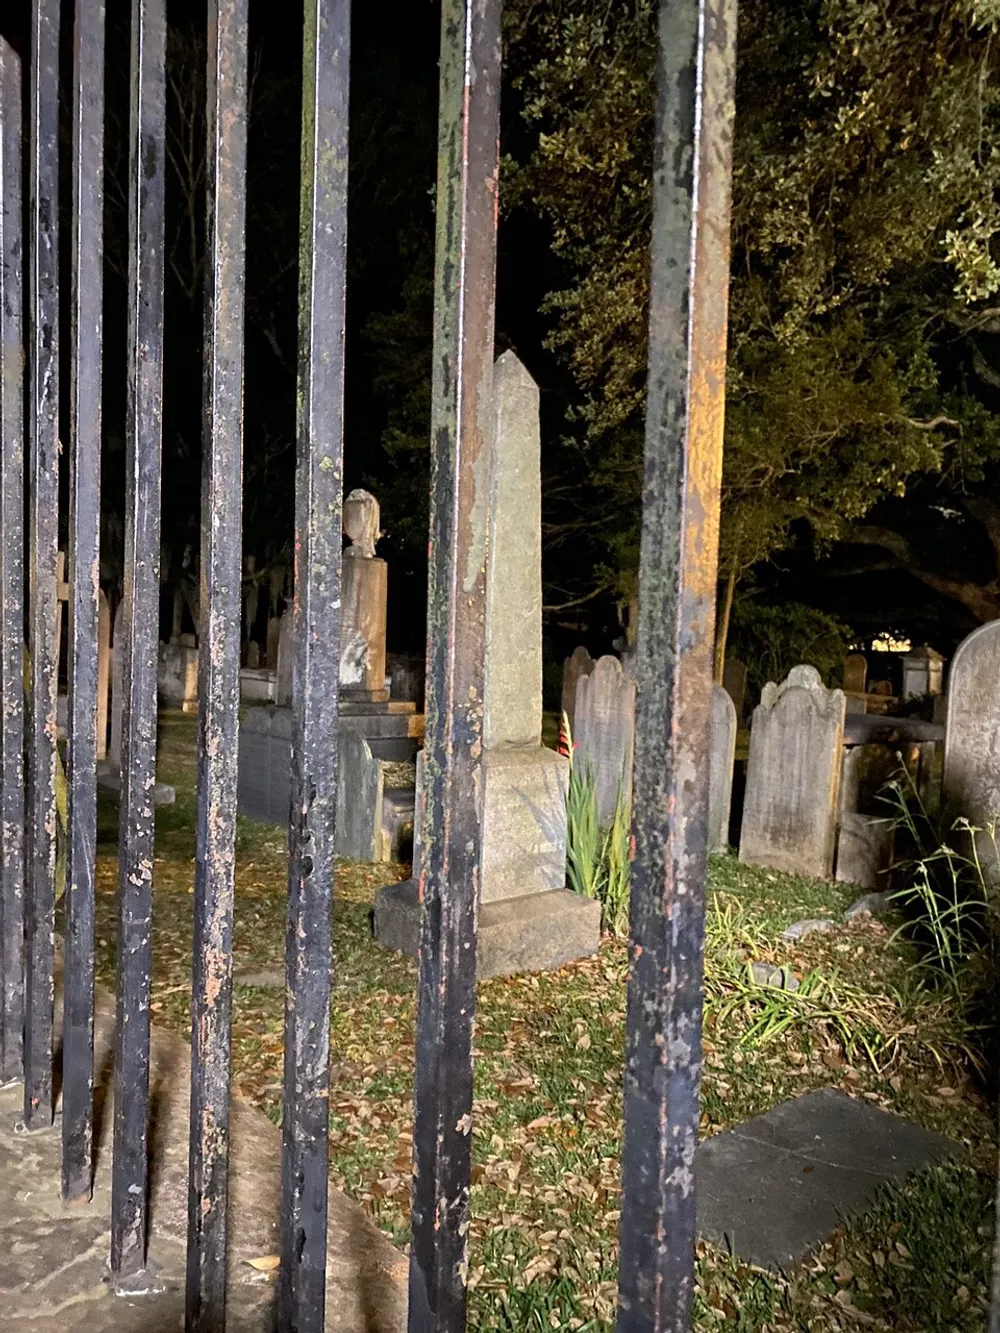 The image shows a weathered iron fence with a view into an old dimly lit cemetery at night with various tombstones and vegetation visible in the background